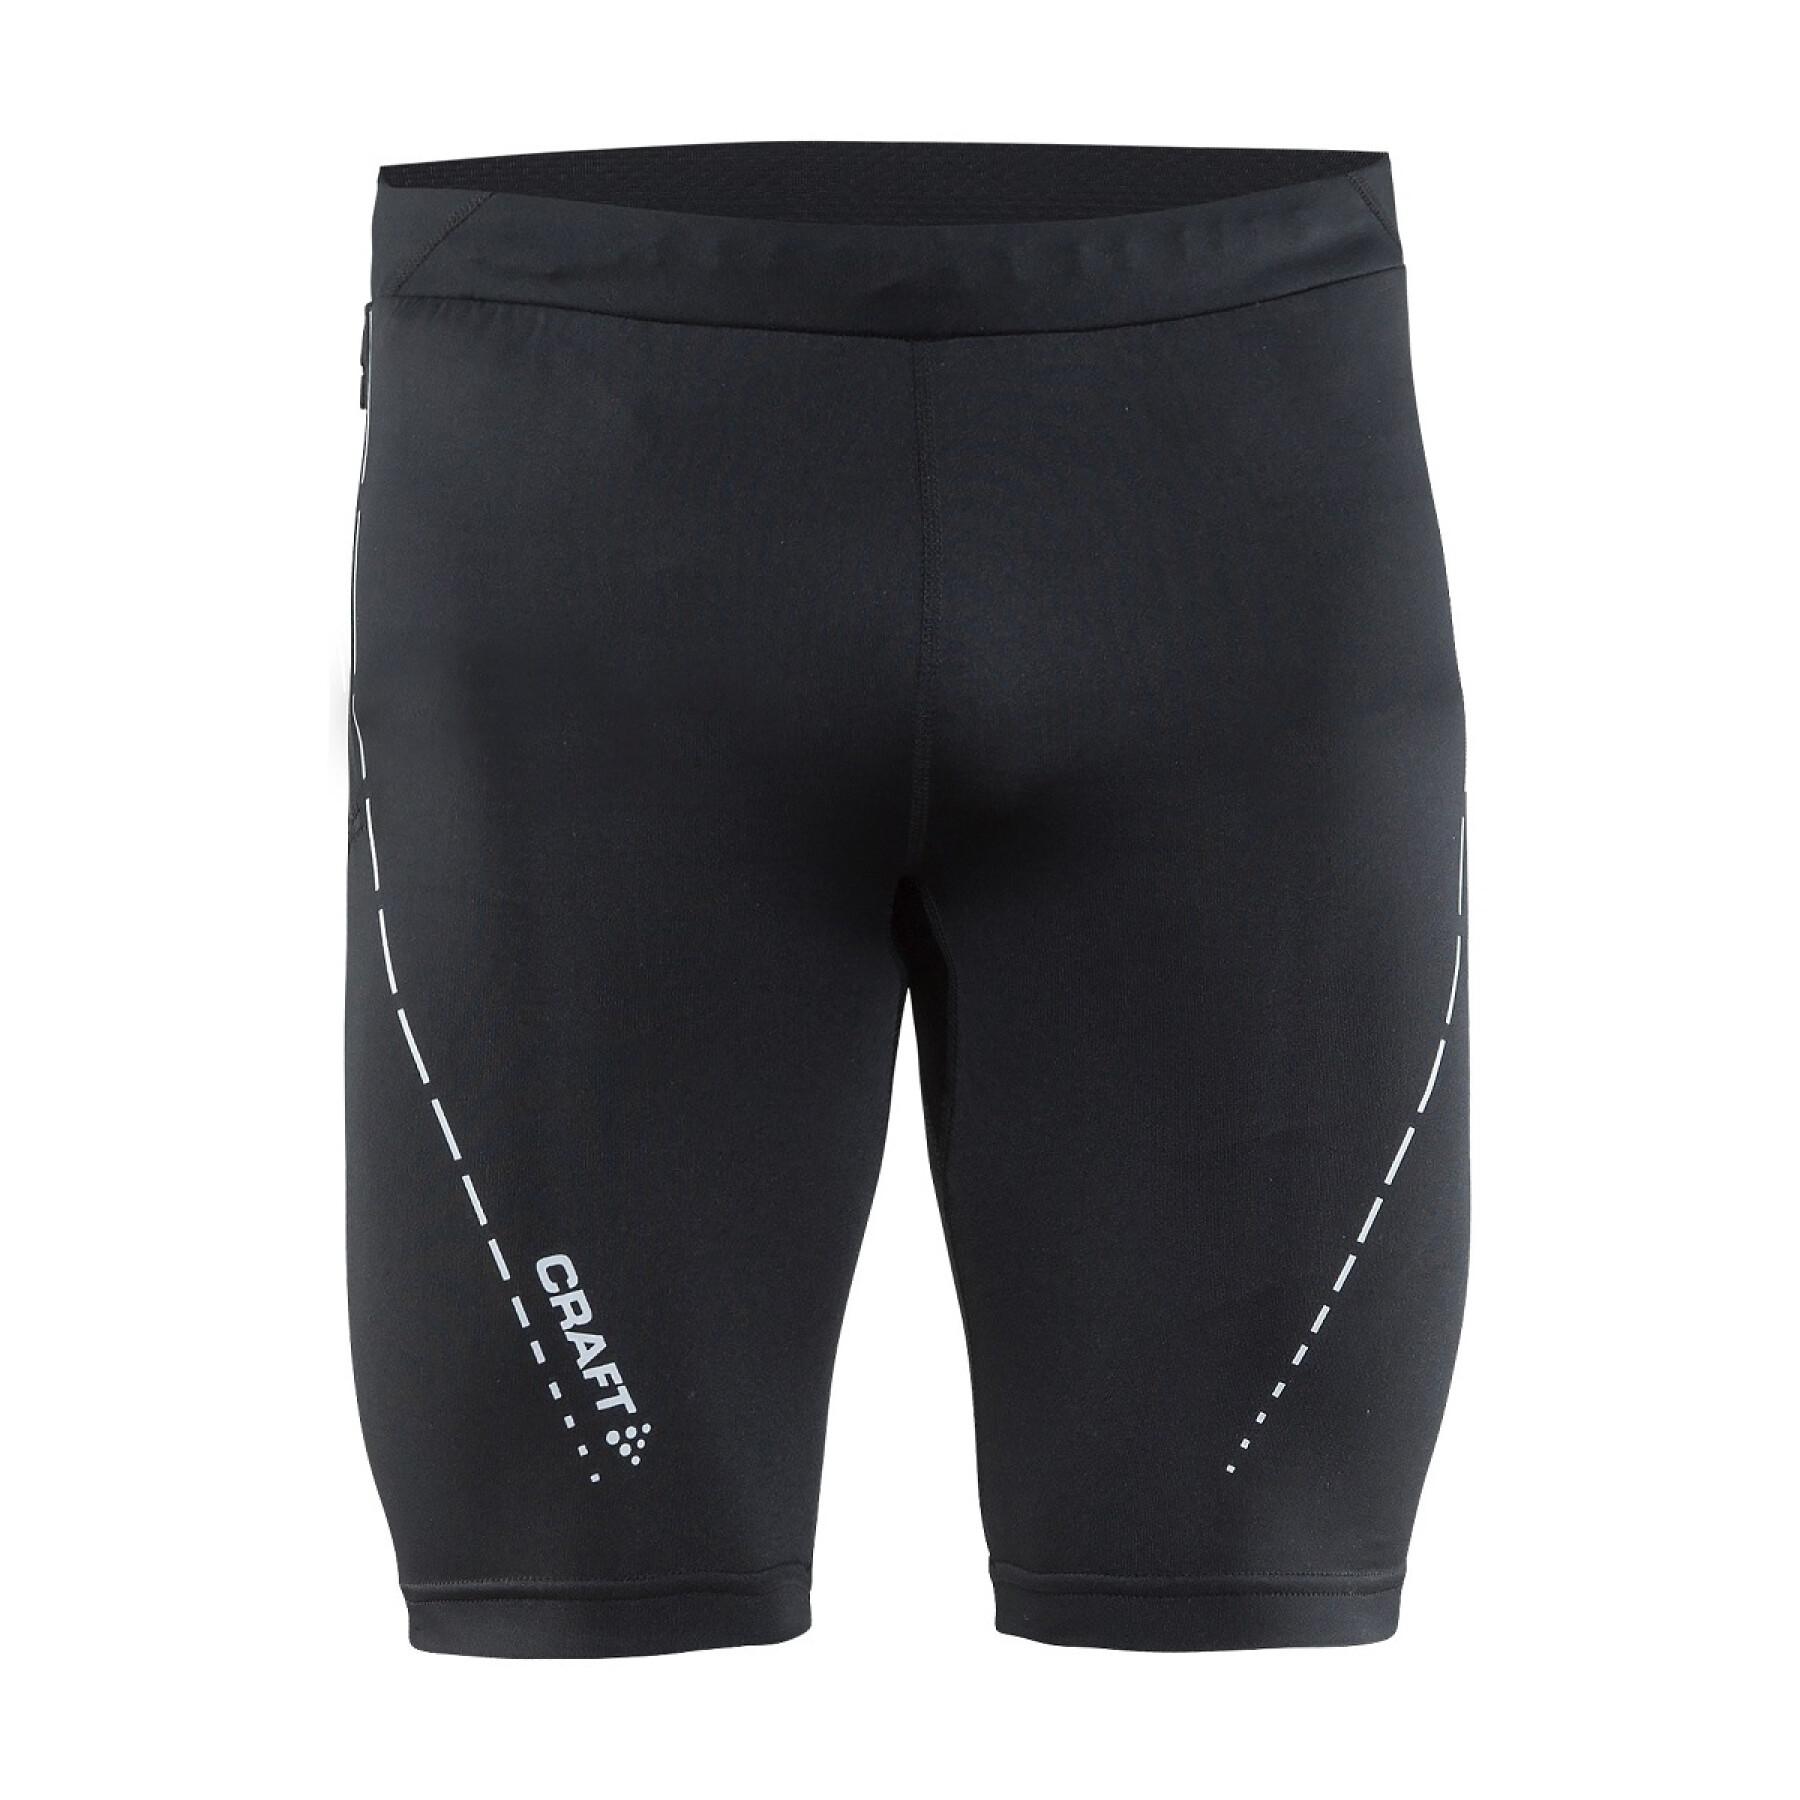 Shorts from running Craft essential